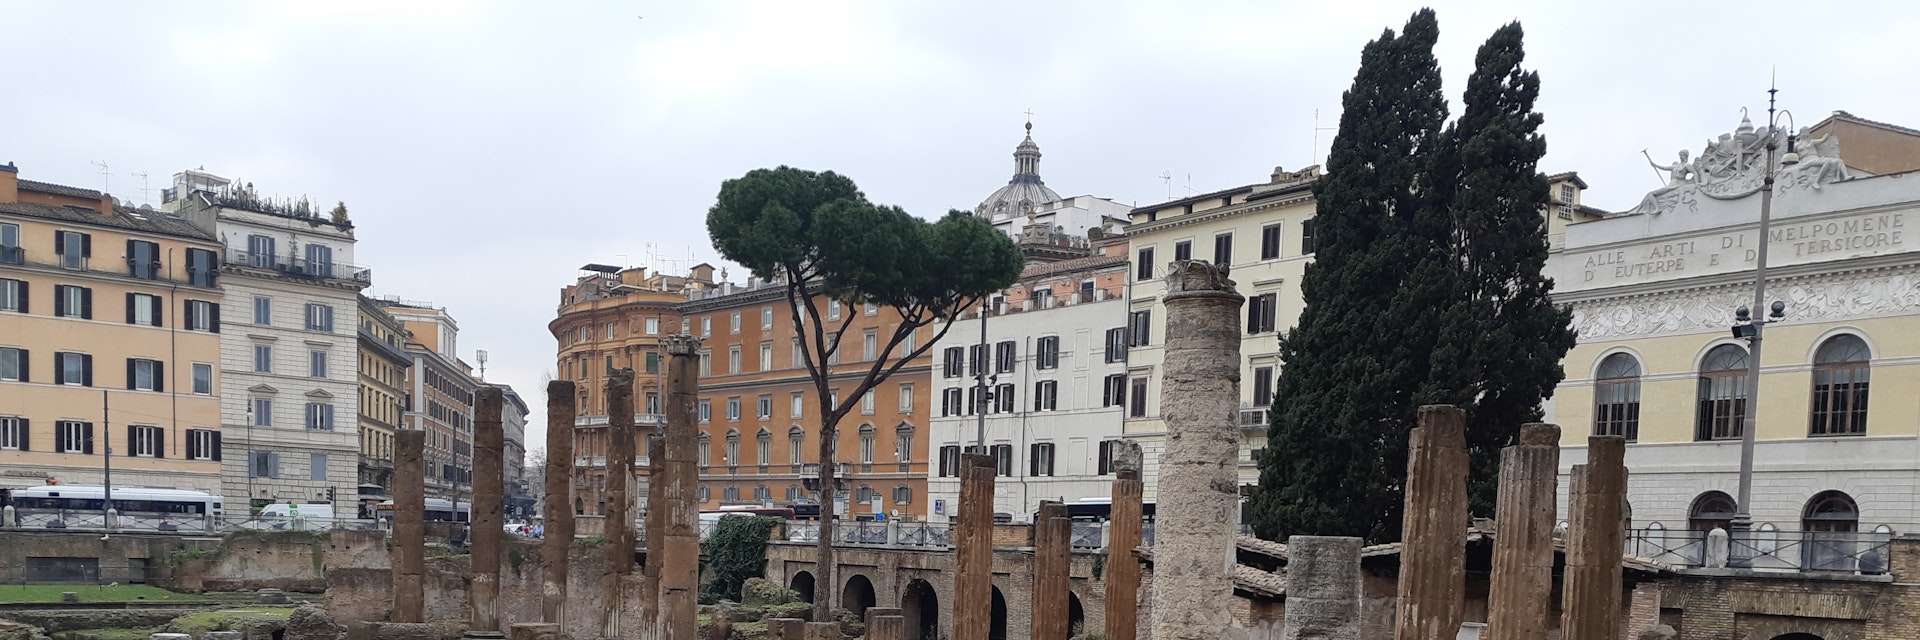 Largo di Torre Argentina houses the remains of 4 Republican era temples and a modern day cat sanctuary.